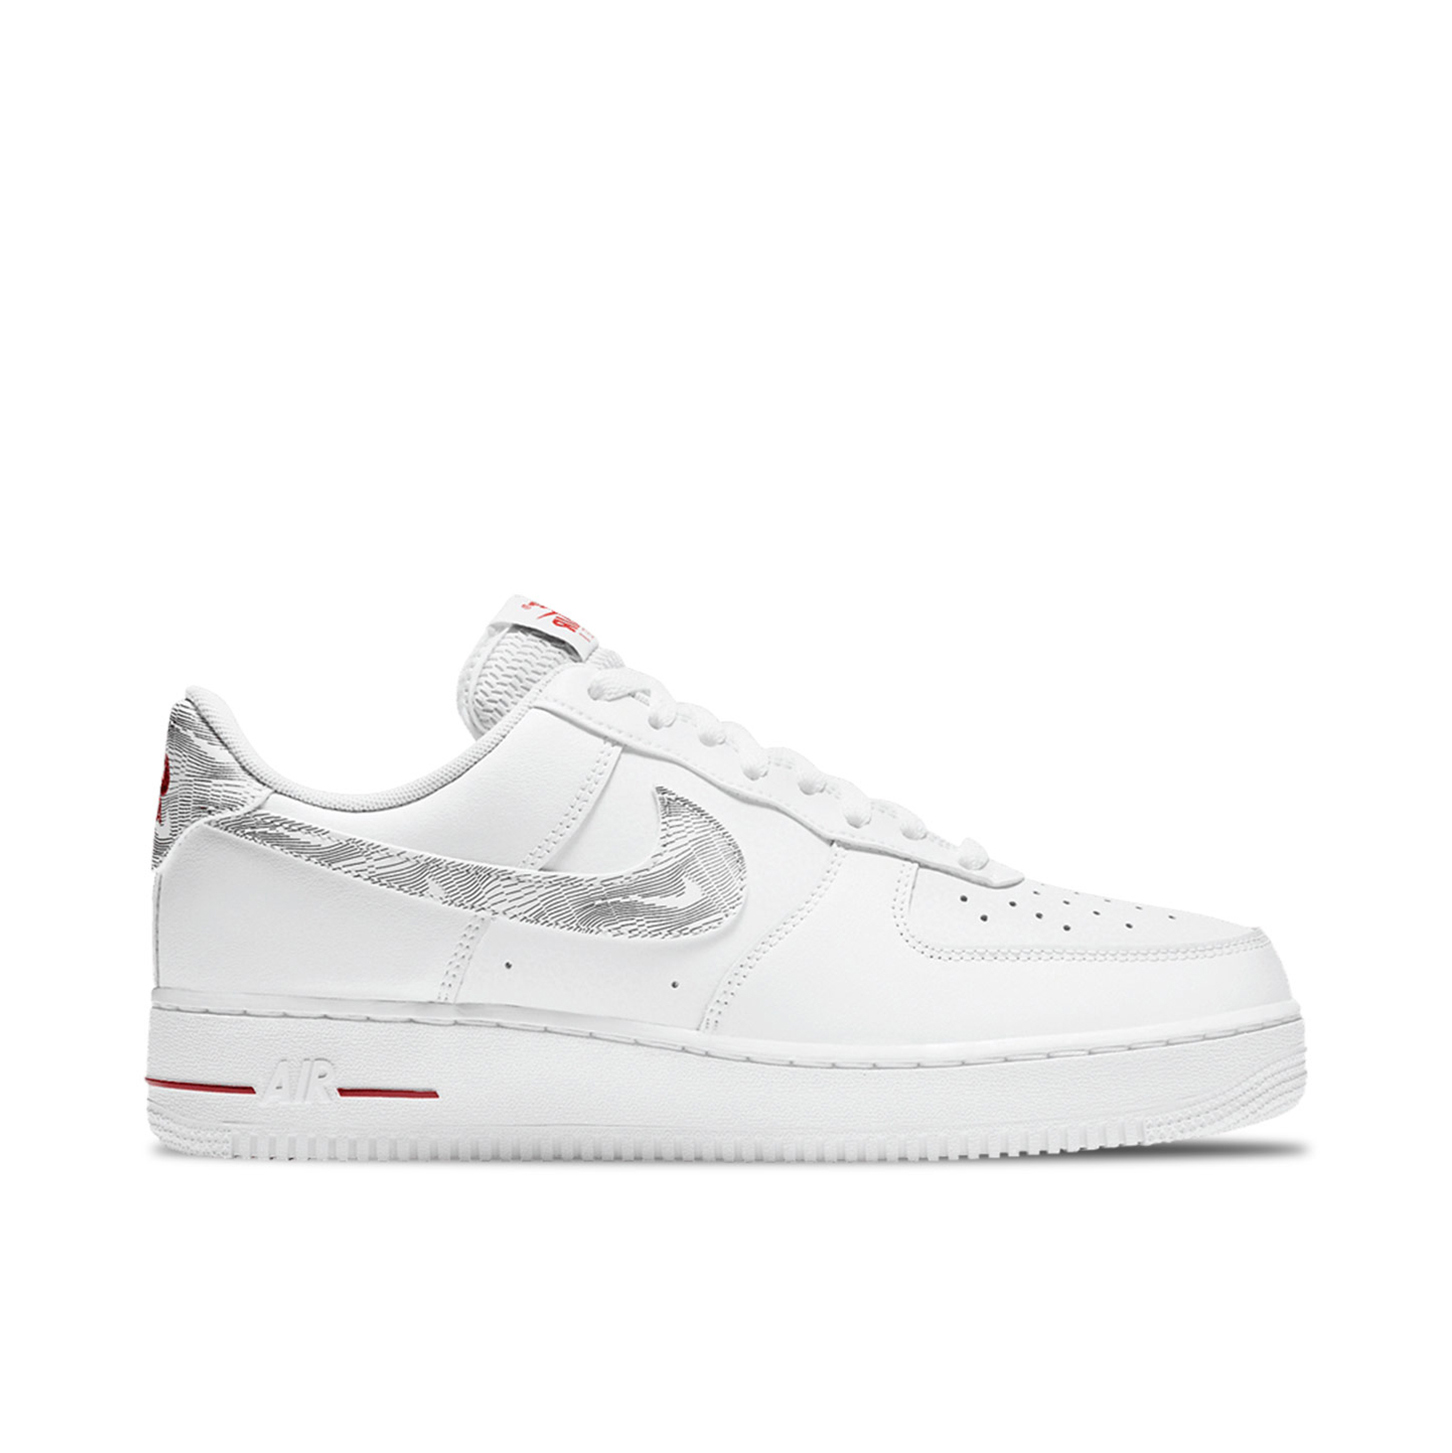 Air Force 1 Low Topography Pack White University Red | dh3941-100 | Laced